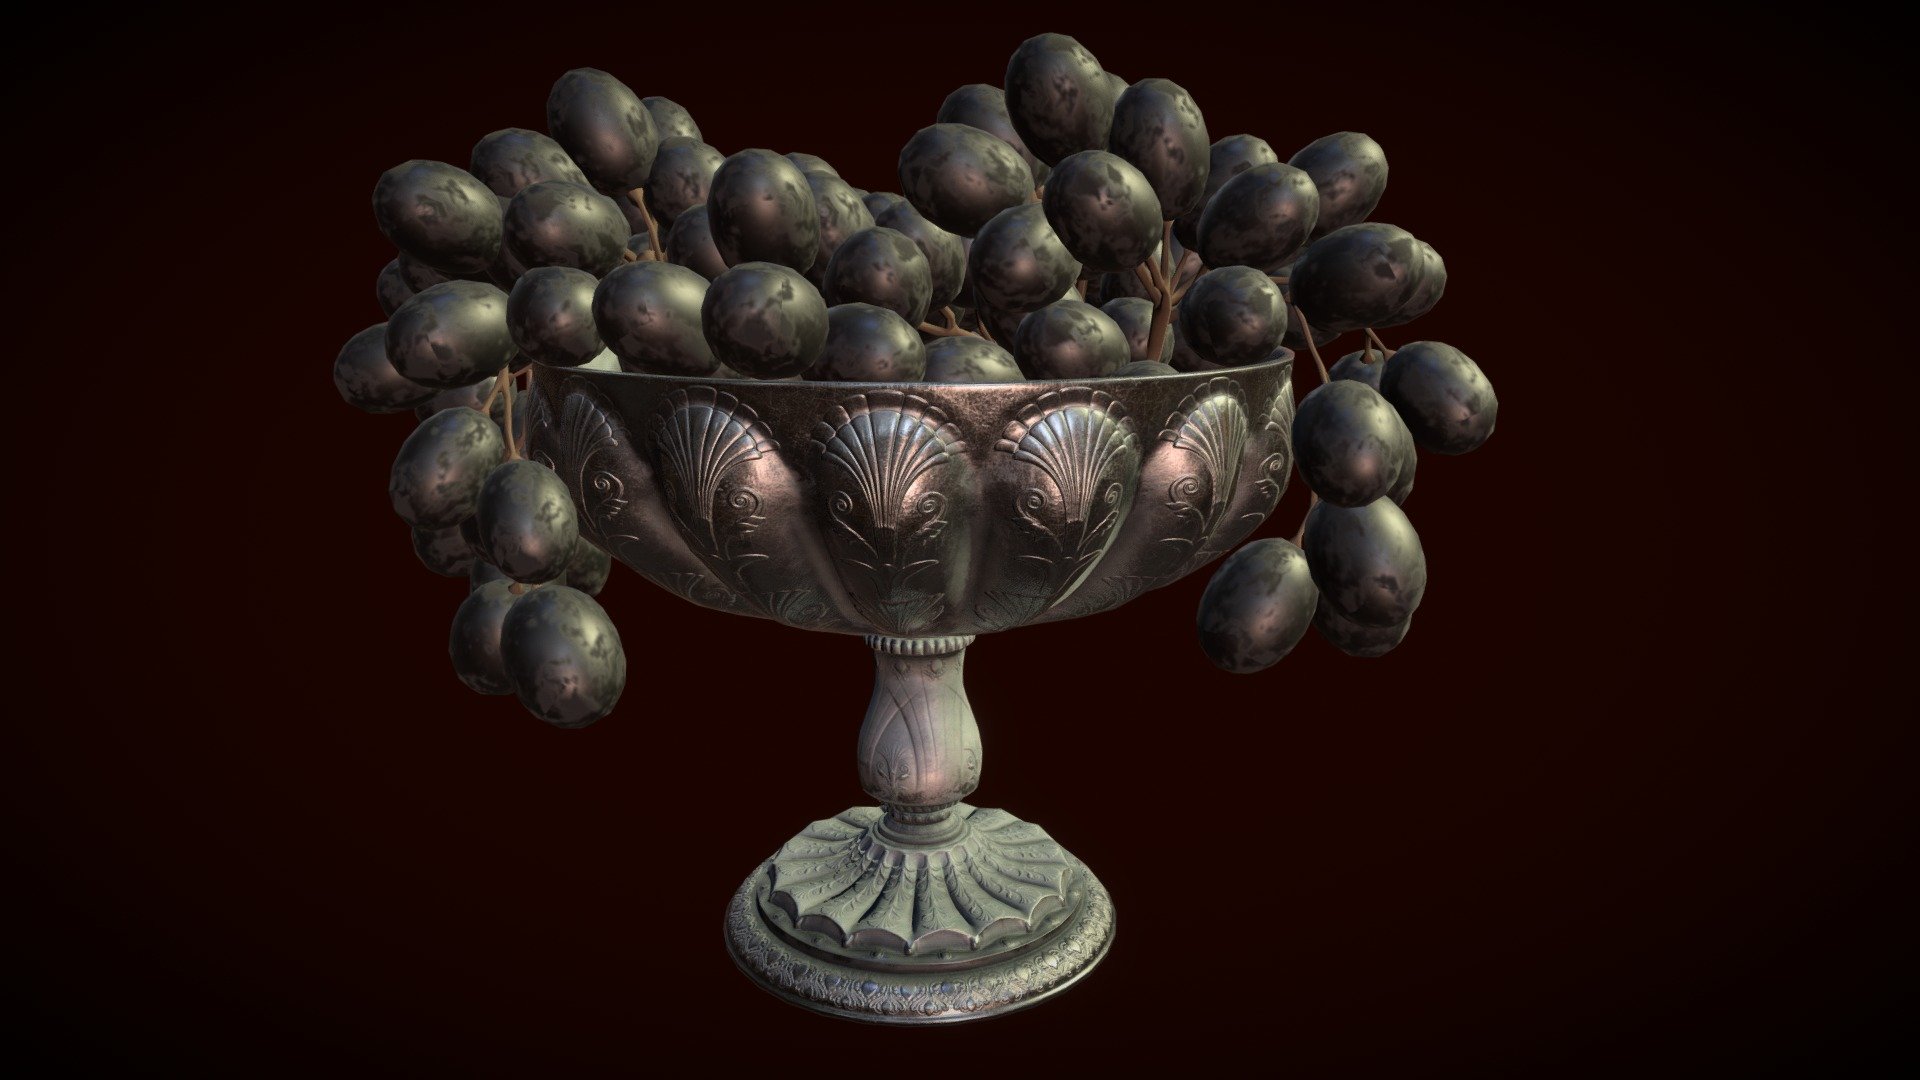 A victorian era fruitbowl from my victorian still life.
I used refractive opacity on the grapes to fake the translucency effect 3d model